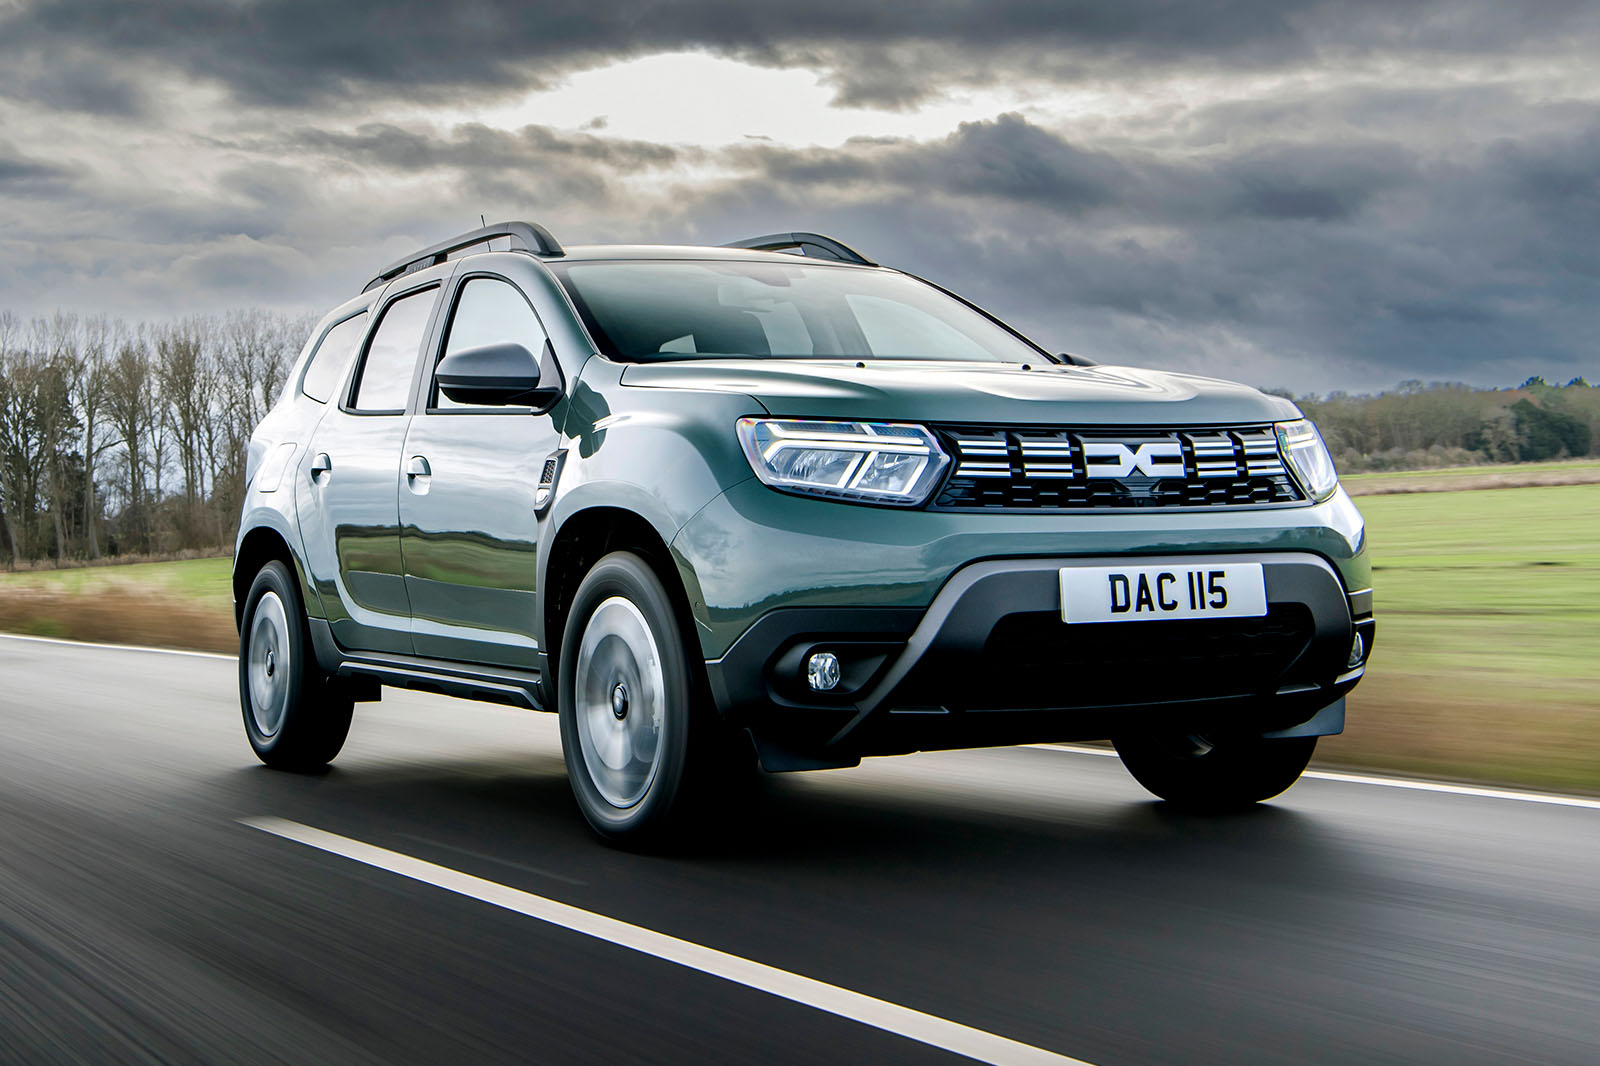 New Renault Duster 1.3 Turbo Petrol automatic detailed review -  Introduction